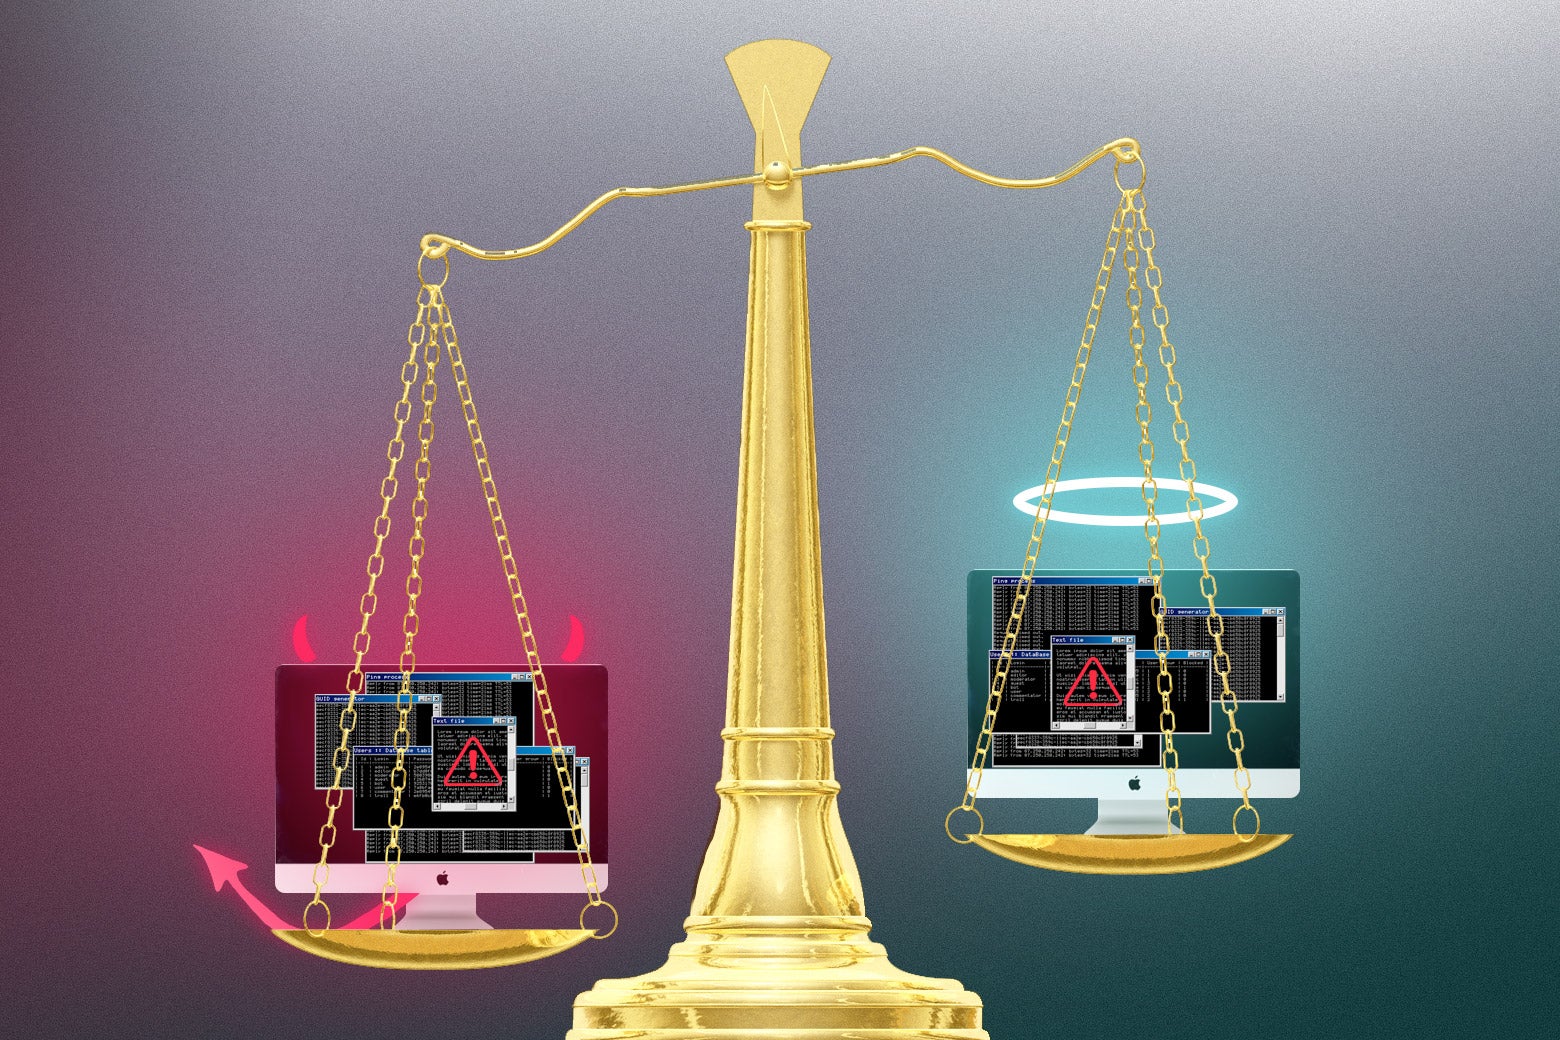 Two computer screens sit on a scale; the heavier computer screen wears devil's horns and a tail, while the lighter screen wears a halo.